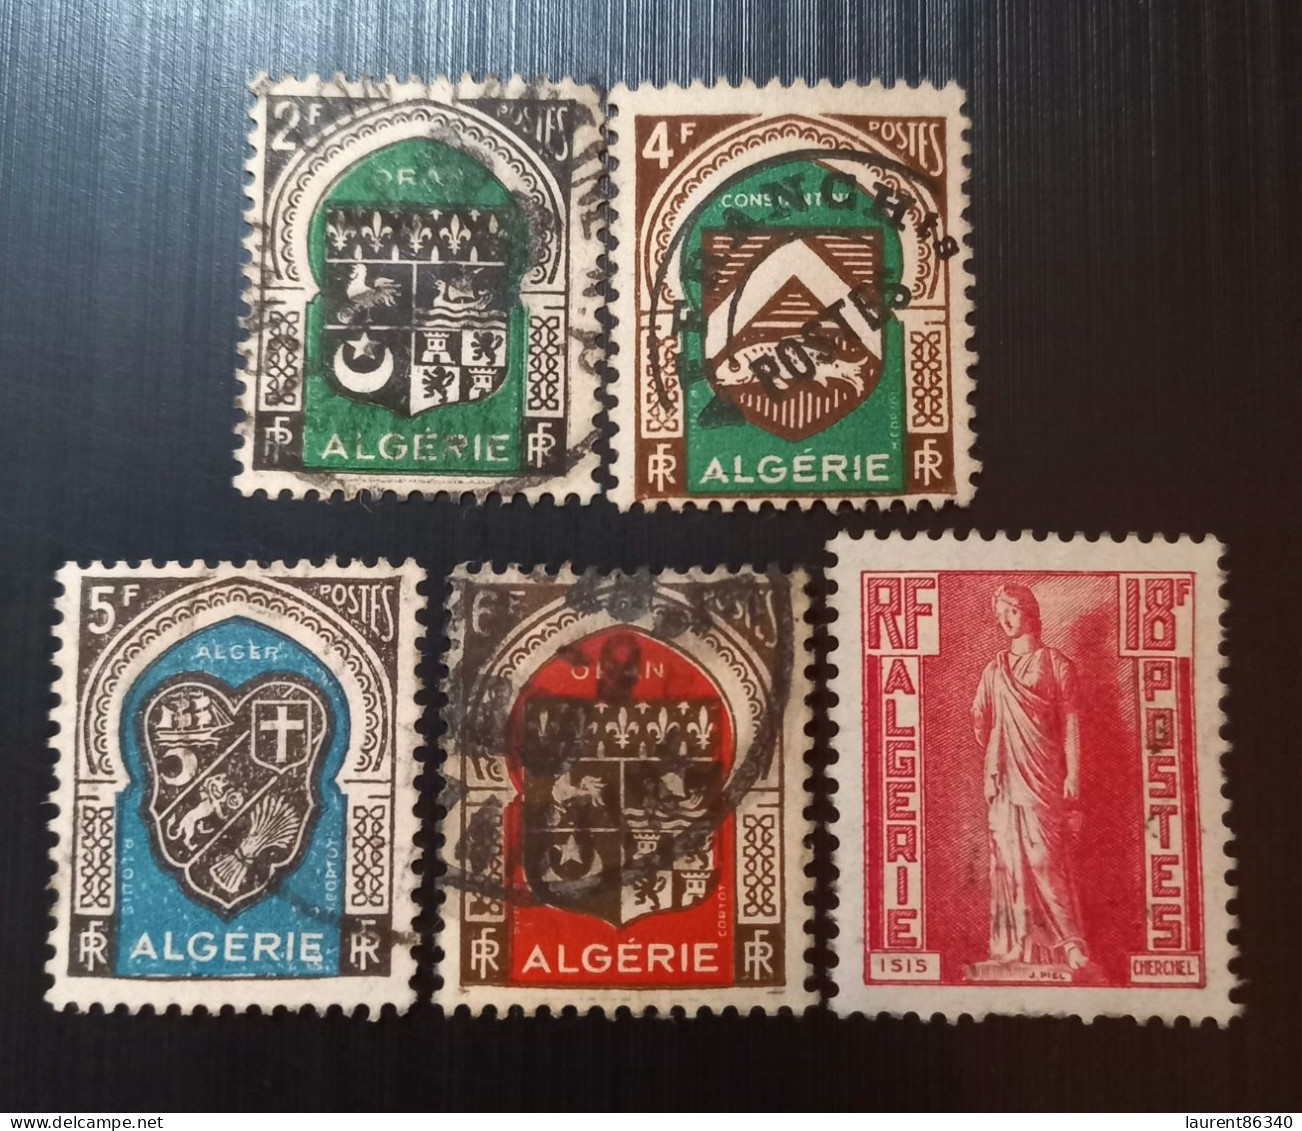 Algérie 1947 -1949 Armoiries Alger, Constantine Et Oran  Perforation: 14 X 13½ & 1952 Statues Nationales - Used Stamps